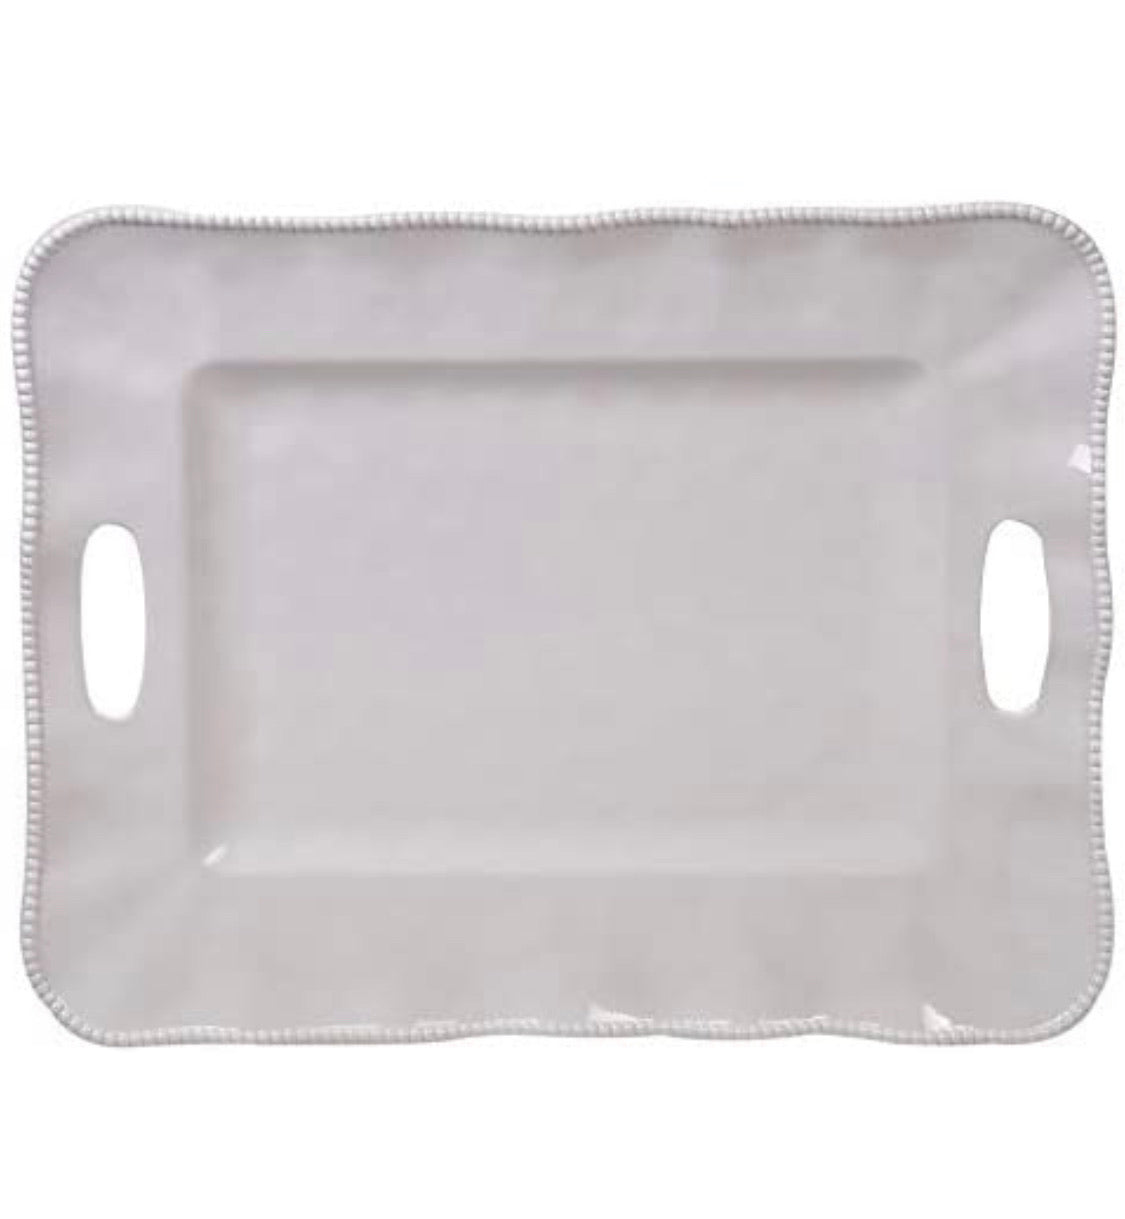 Large Melamine Tray with Handles